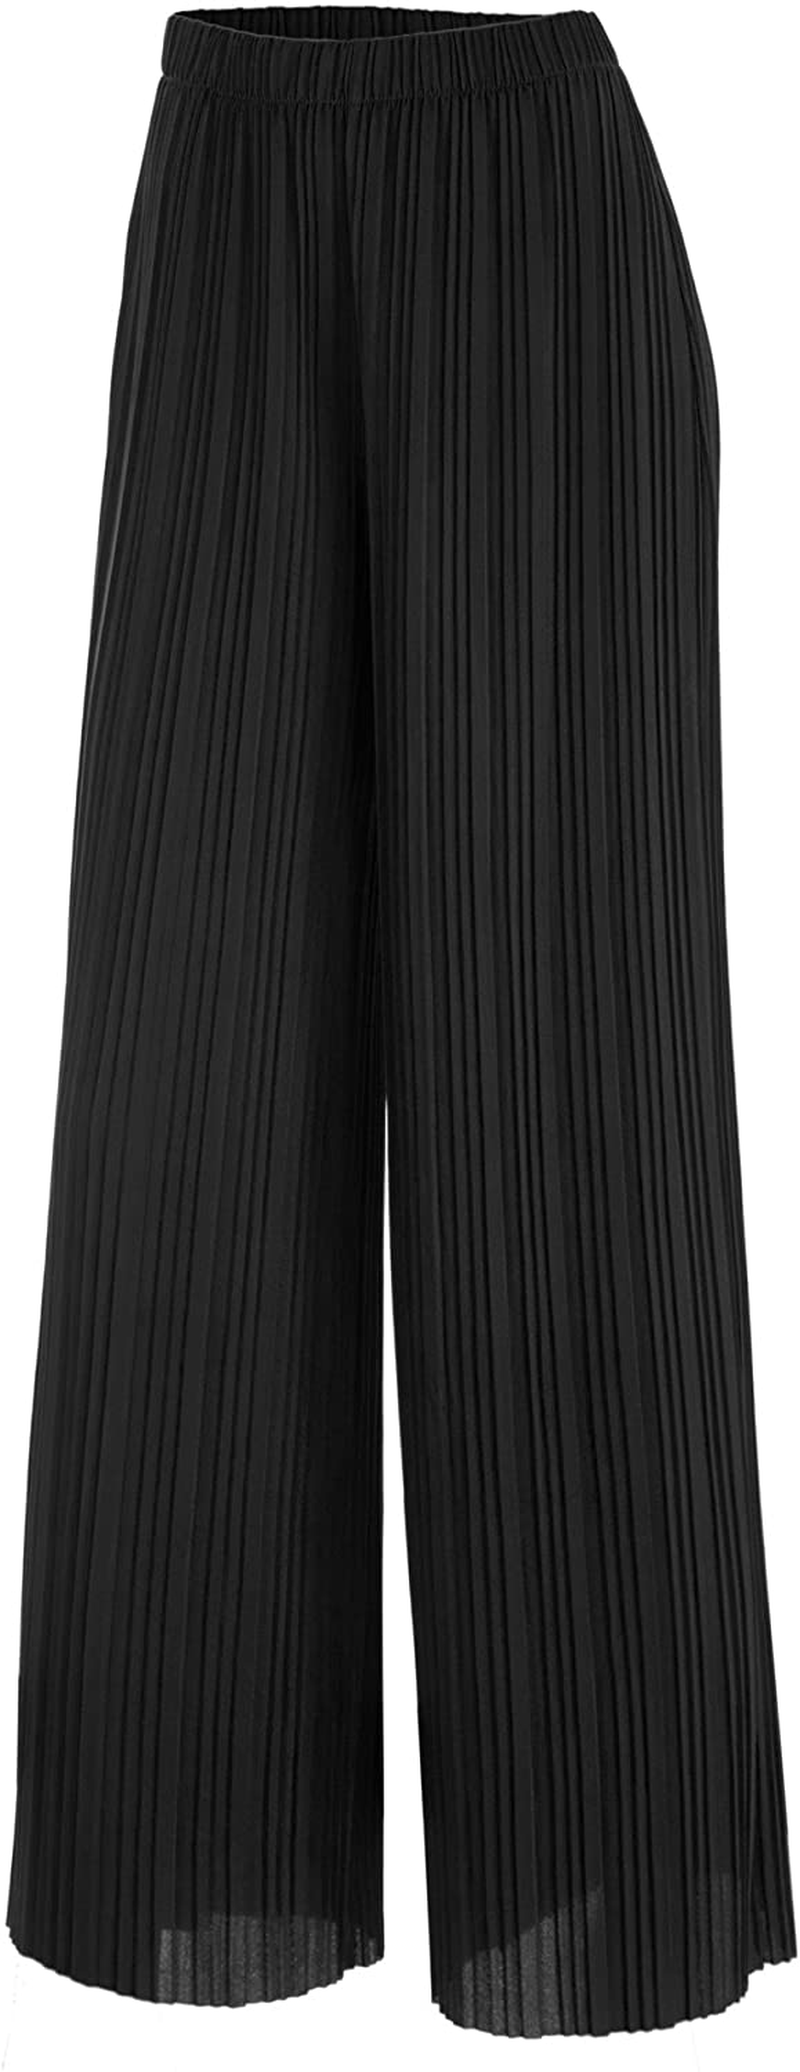 Made By Johnny Women's Premium Pleated Maxi Wide Leg Palazzo Pants Gaucho- High Waist with Drawstring